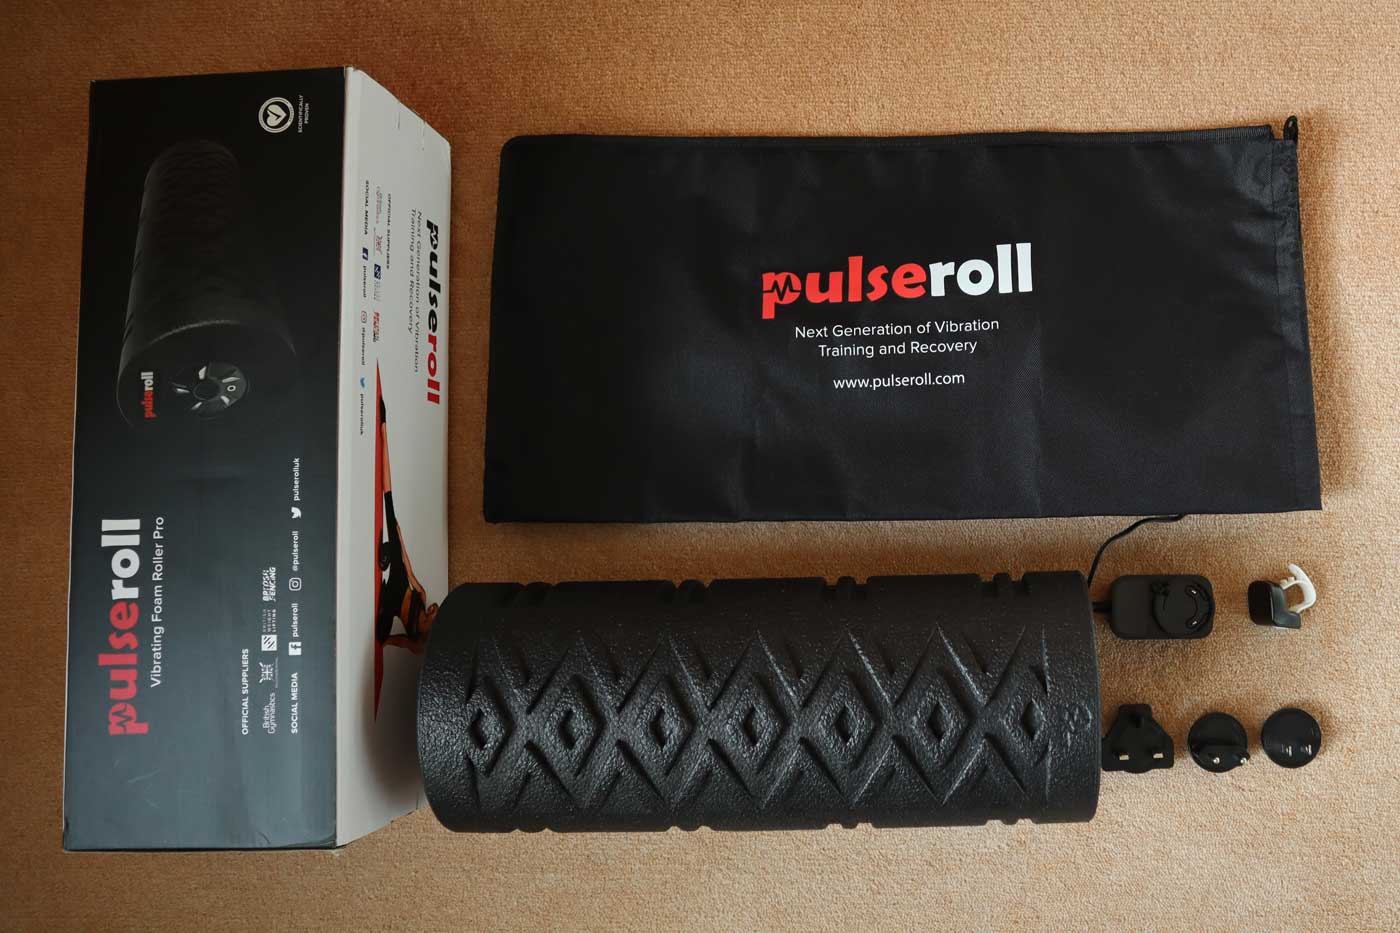 Pulseroll Vibrating Foam Roller Pro box and included accessories 